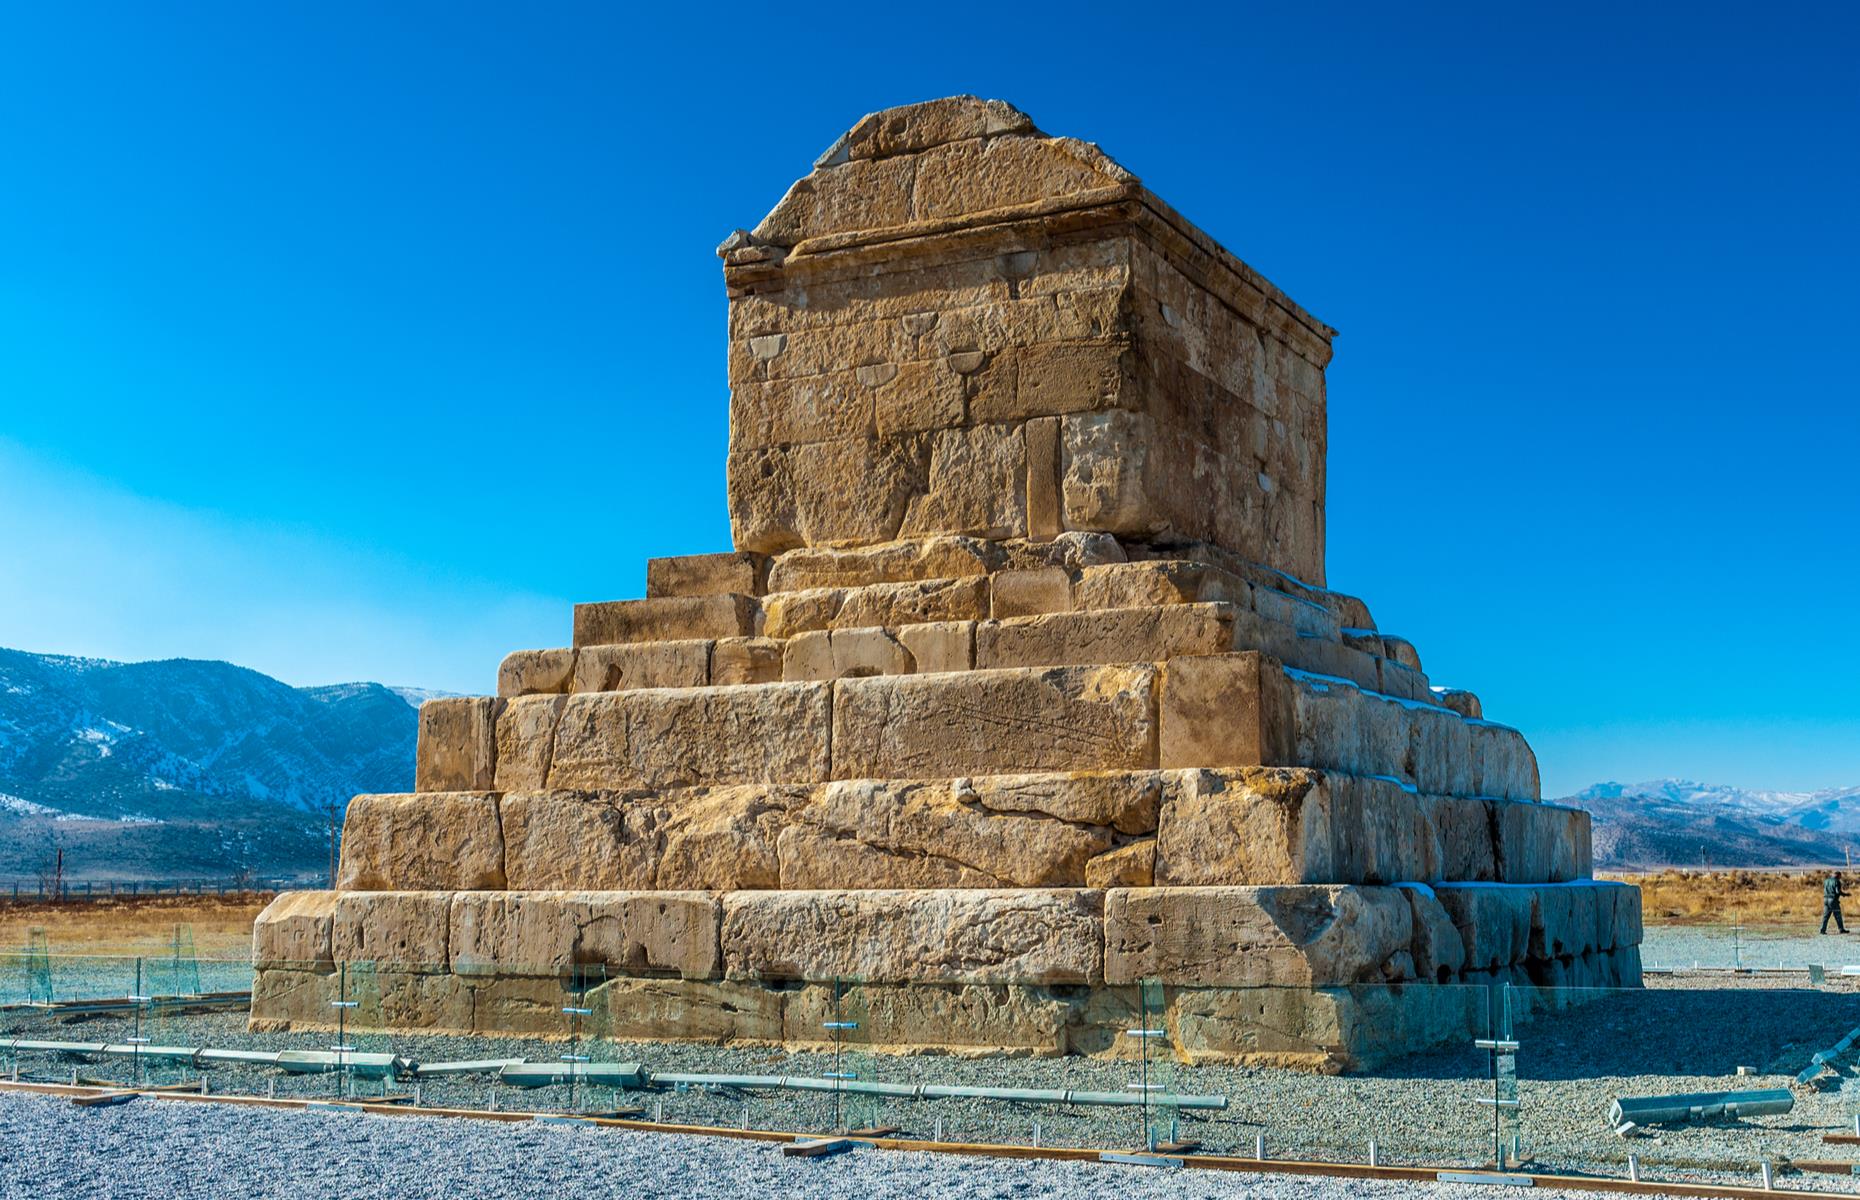 Founded by Cyrus the Great in the 6th century BC, Pasargadae is one of the oldest residences of the Achaemenid kings. Among its wonders are the citadel, the site's oldest remains which are known as Tall-i Takht or ‘throne hill’ and overlook the palace complex. It’s also home to the tomb of Cyrus the Great, an imposing limestone structure (pictured).